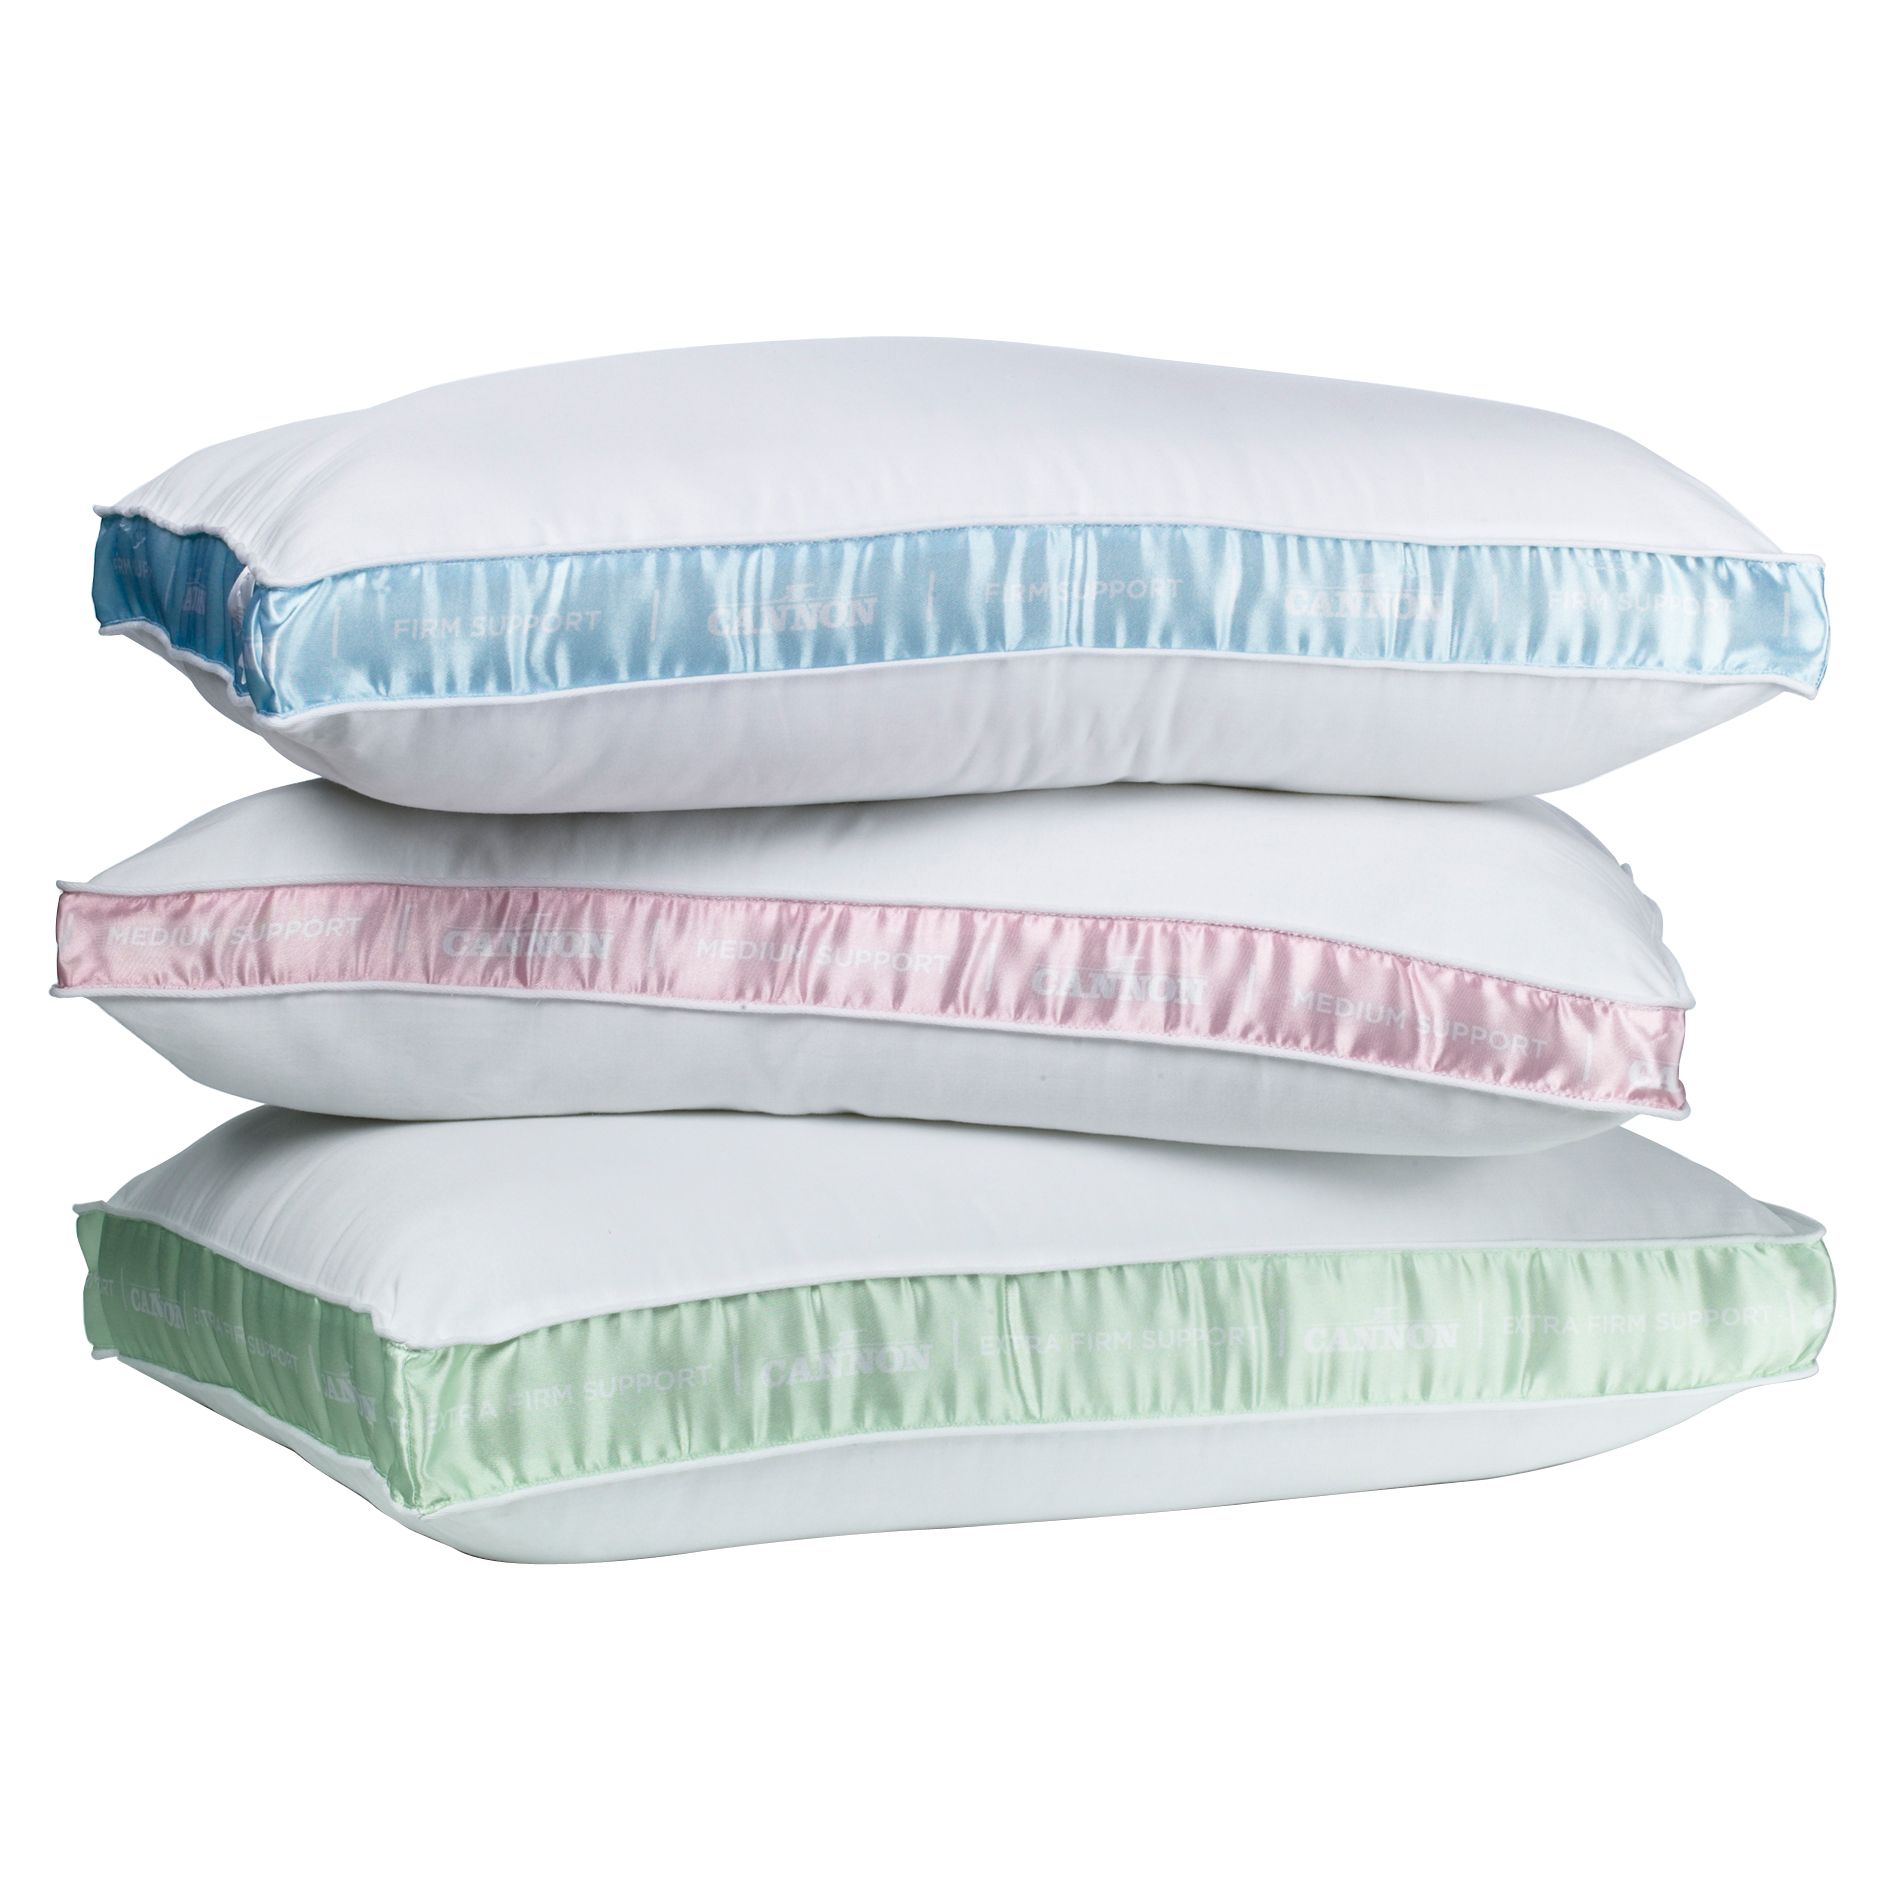 Cannon Gusseted Density Pillow - Firm